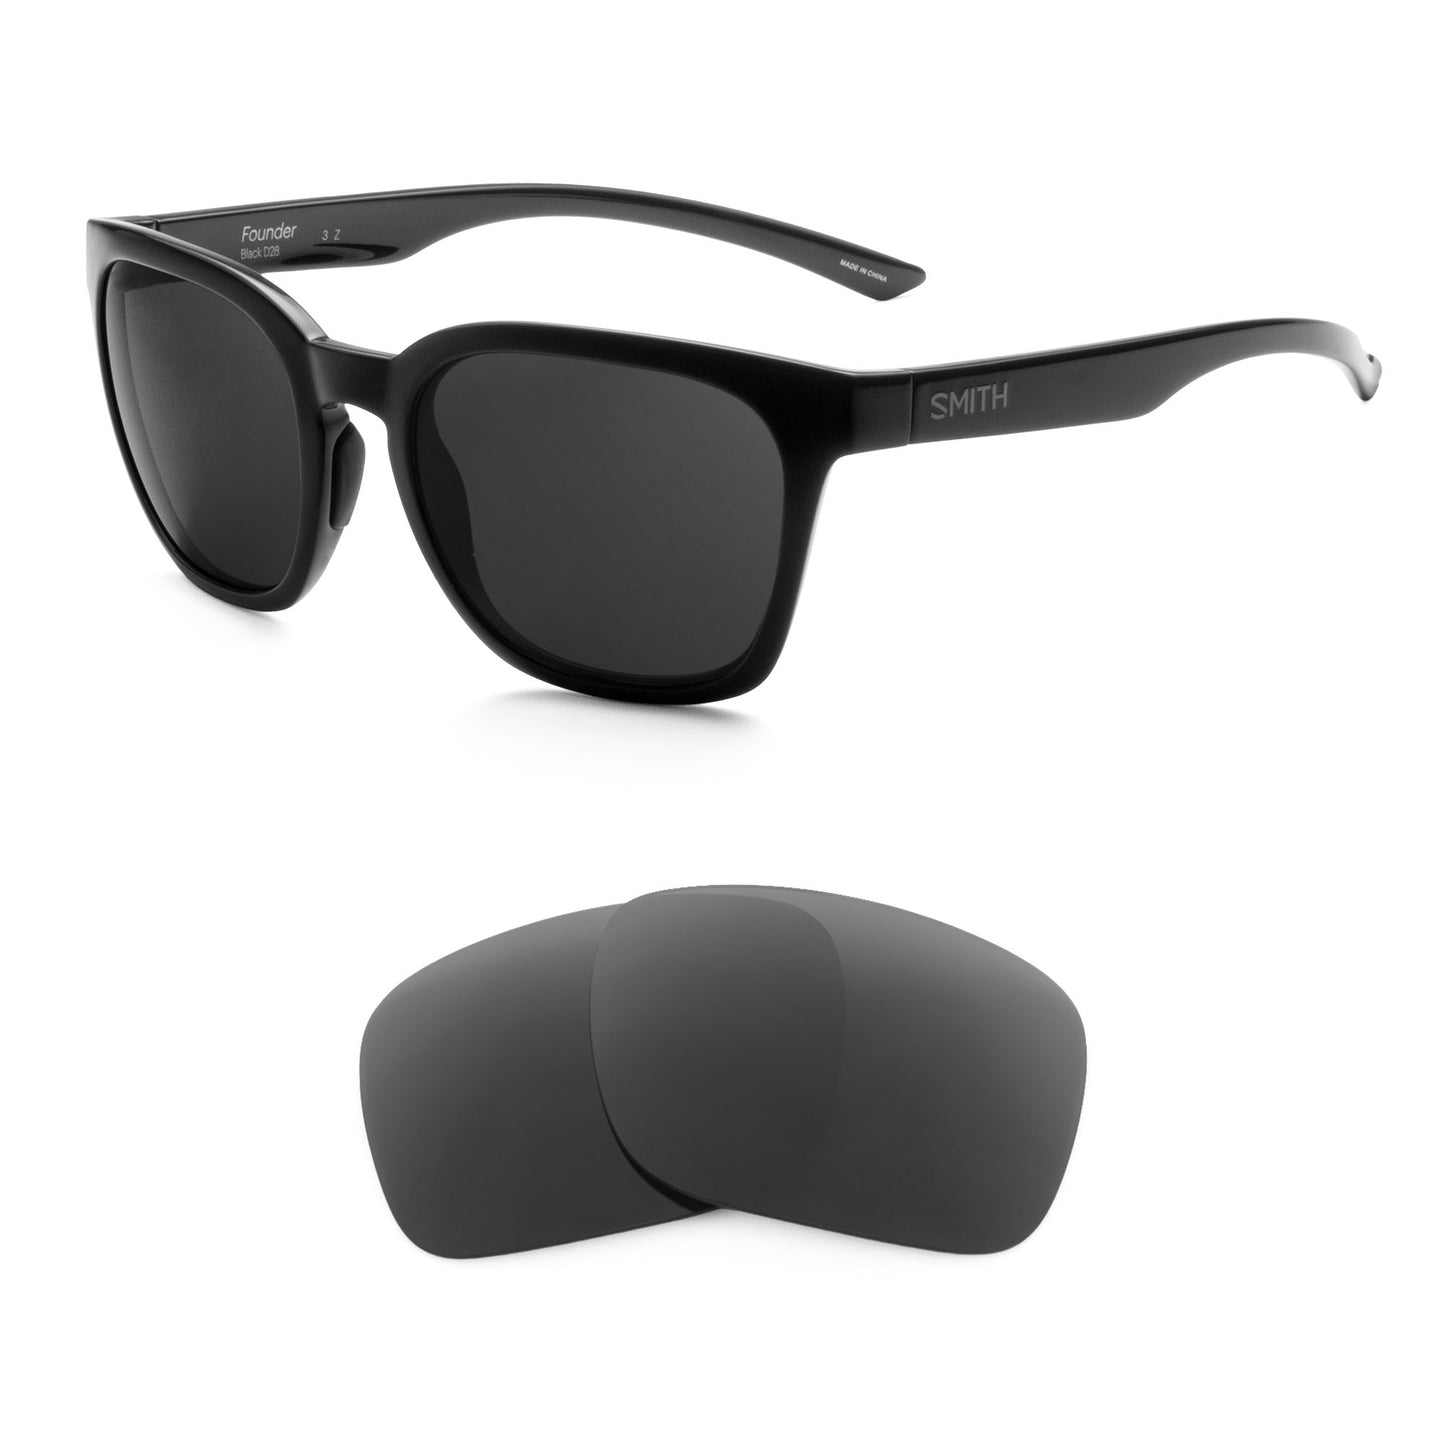 Smith Founder sunglasses with replacement lenses